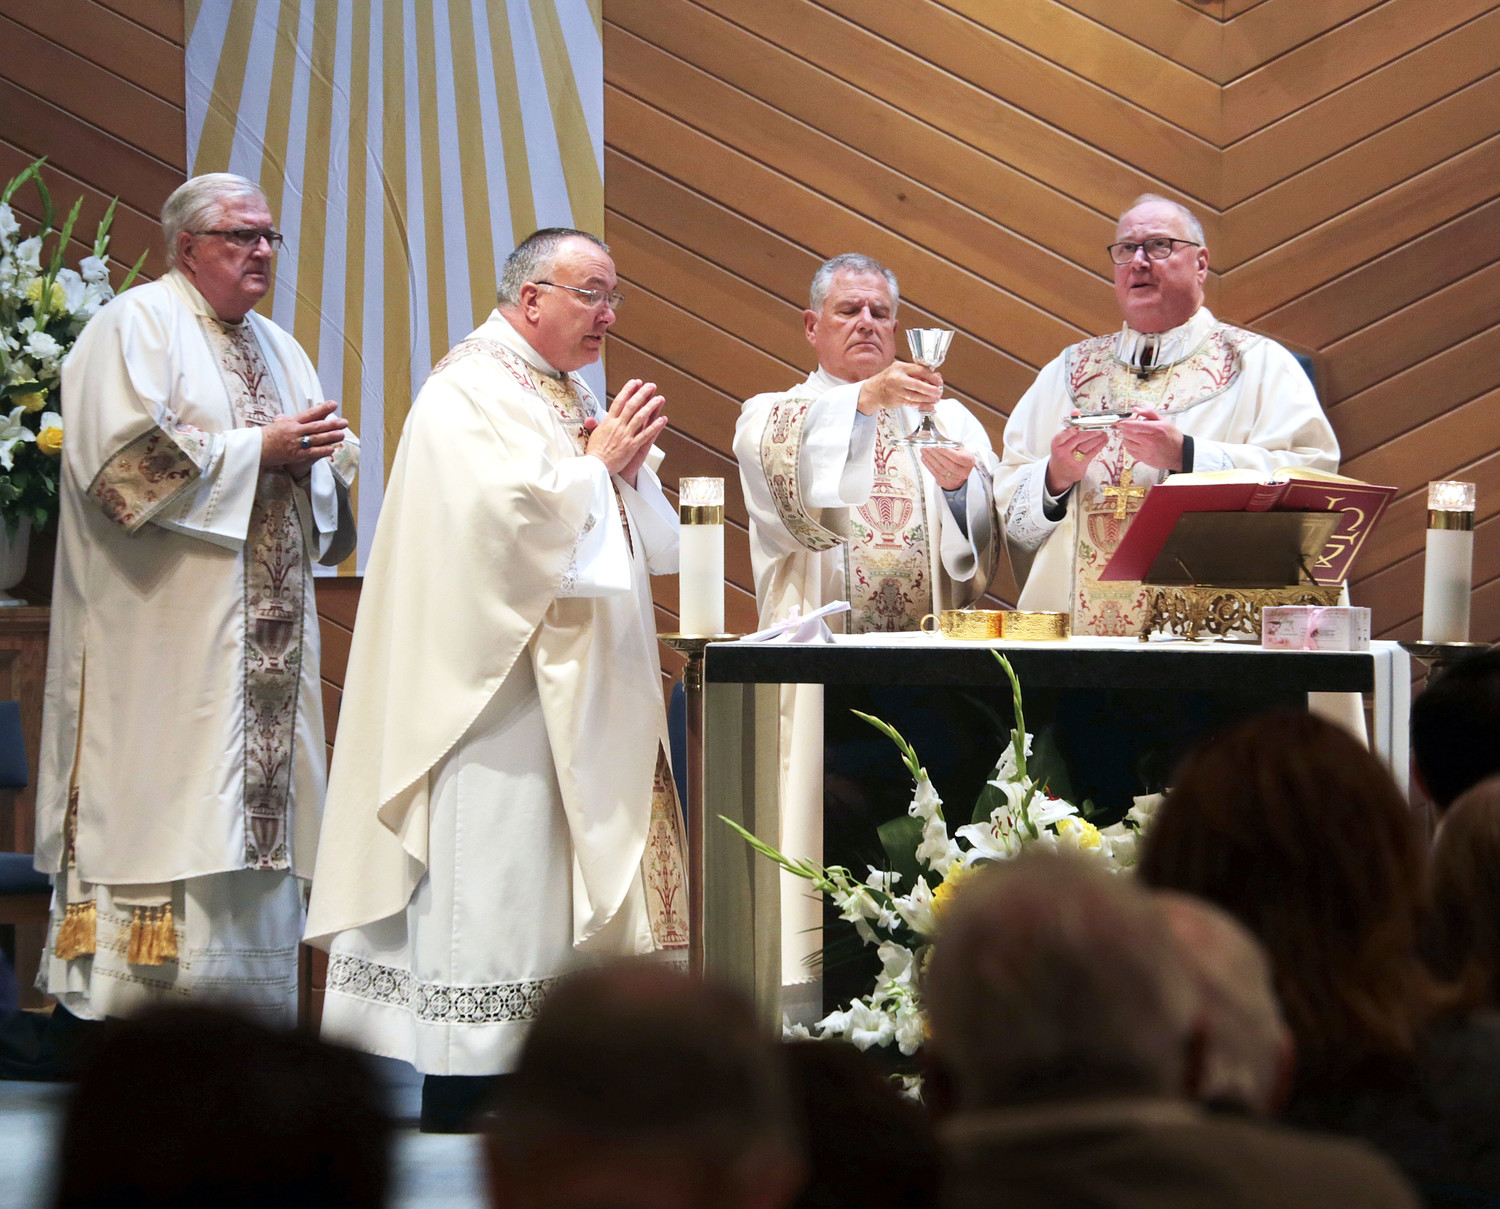 Cardinal Dolan served as principal celebrant and homilist at the 11:30 a.m. liturgy. To his left is Deacon Philip Marino. At far left, front, is the pastor, Father Herbert DeGaris. Behind him is Deacon John Sadowski. The parish recently began the public phase of the major capital campaign Renew + Rebuild. To date, $440,000 in pledges have been made toward its goal of $839,000.